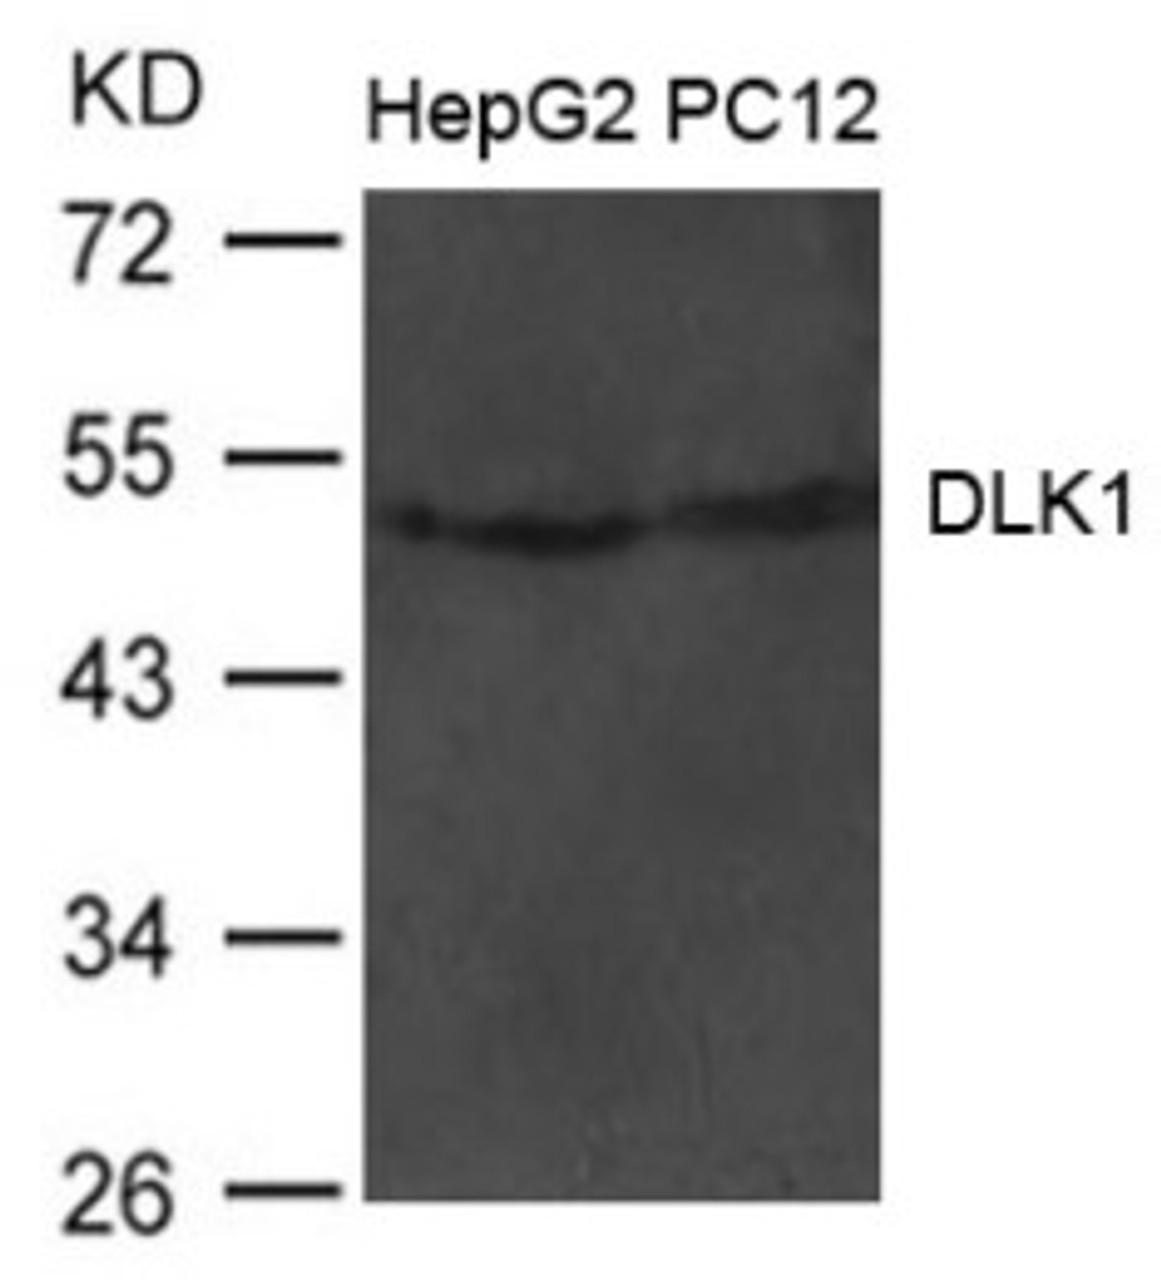 Western blot analysis of extract from HepG2 and PC12 cells using DLK1 Antibody.